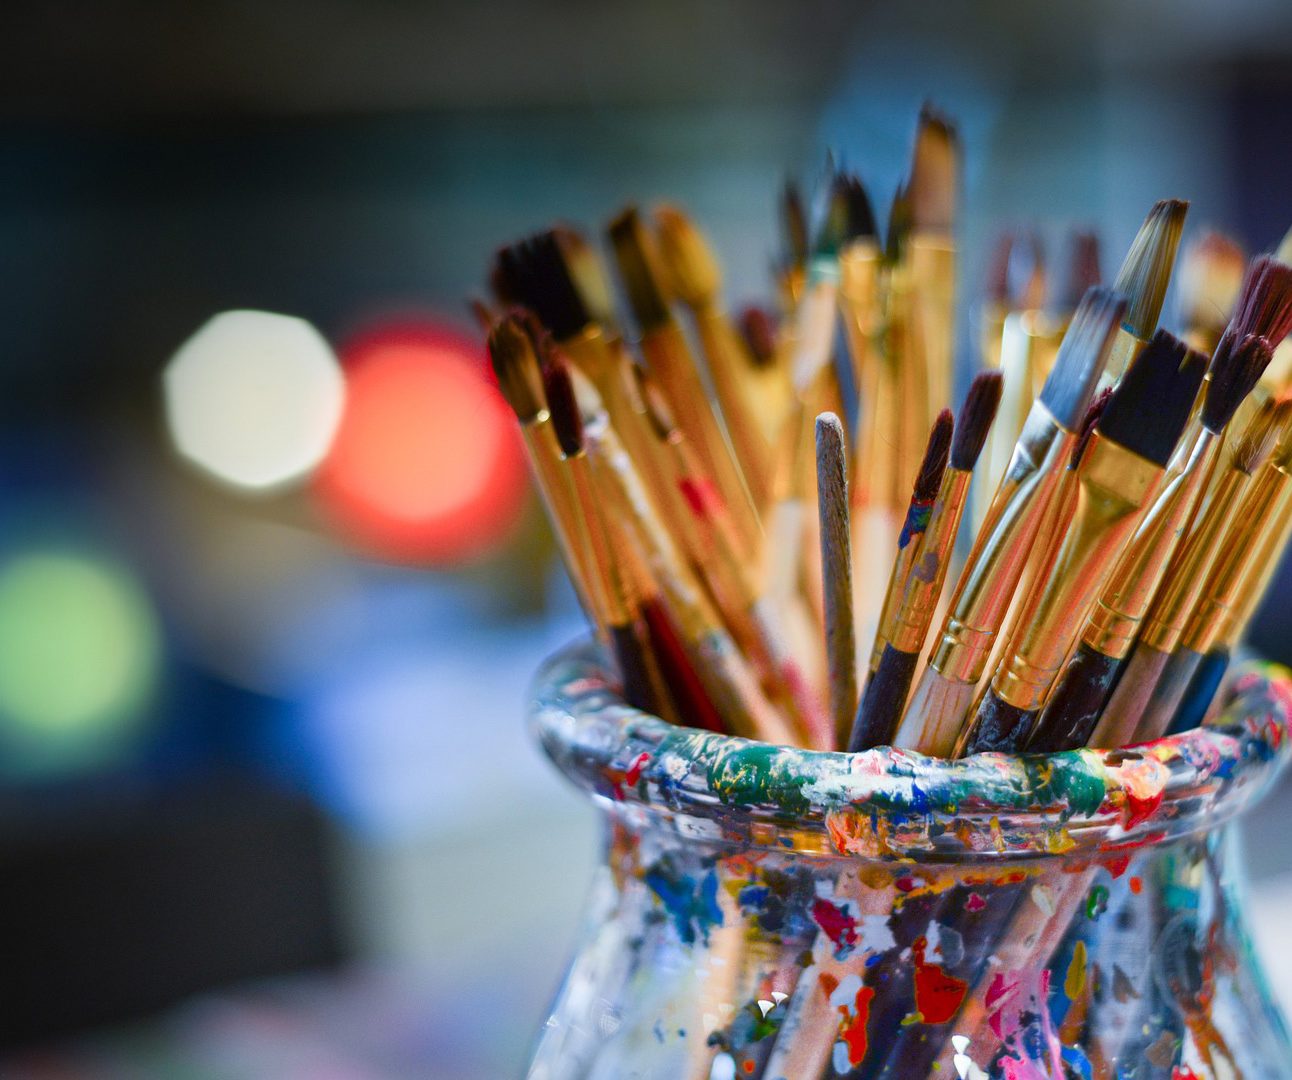 A pot filled with paintbrushes